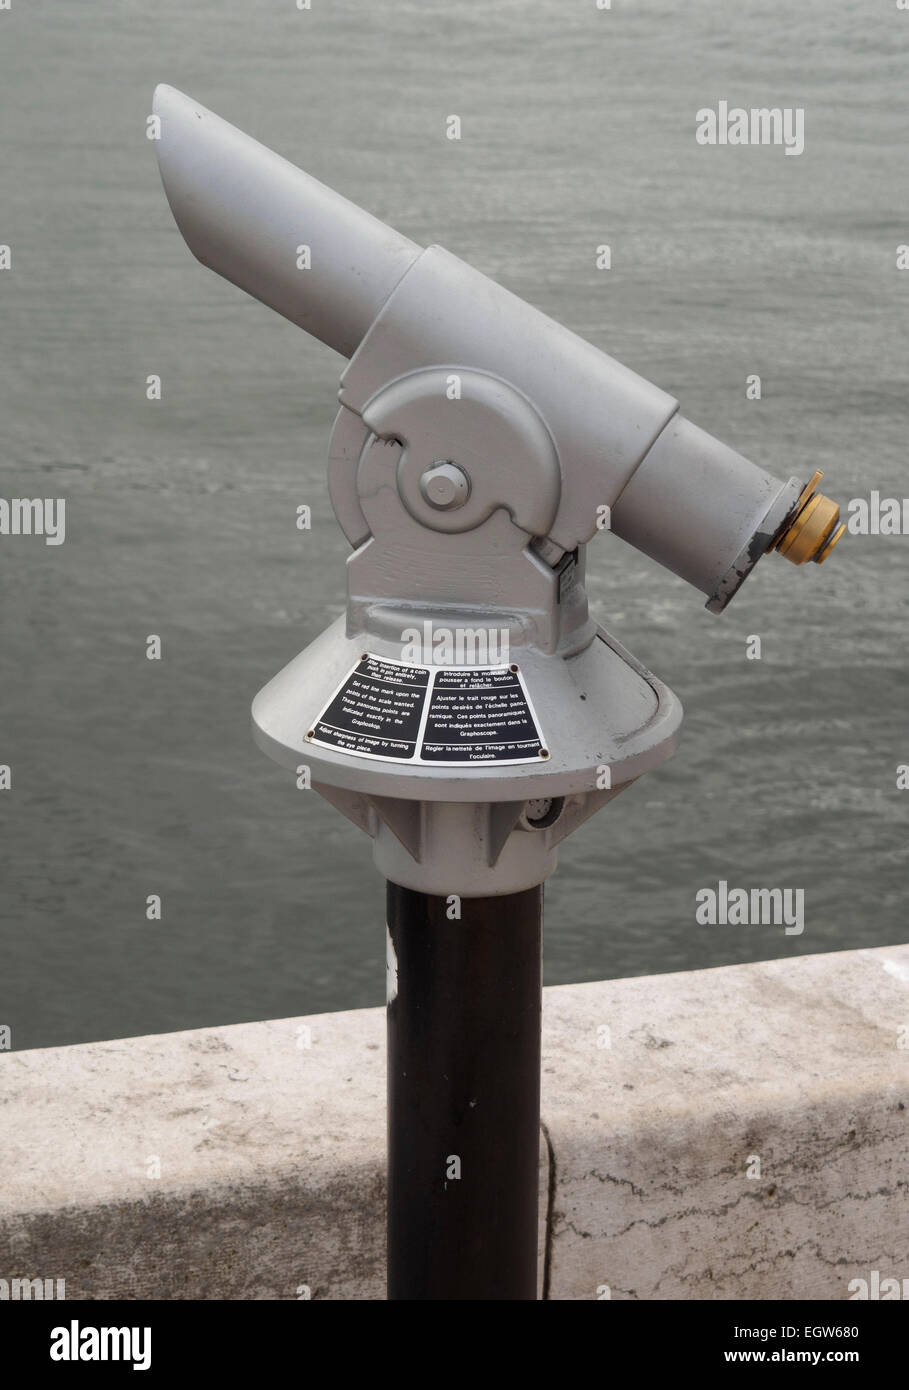 Coin operated sightseeing telescope Stock Photo